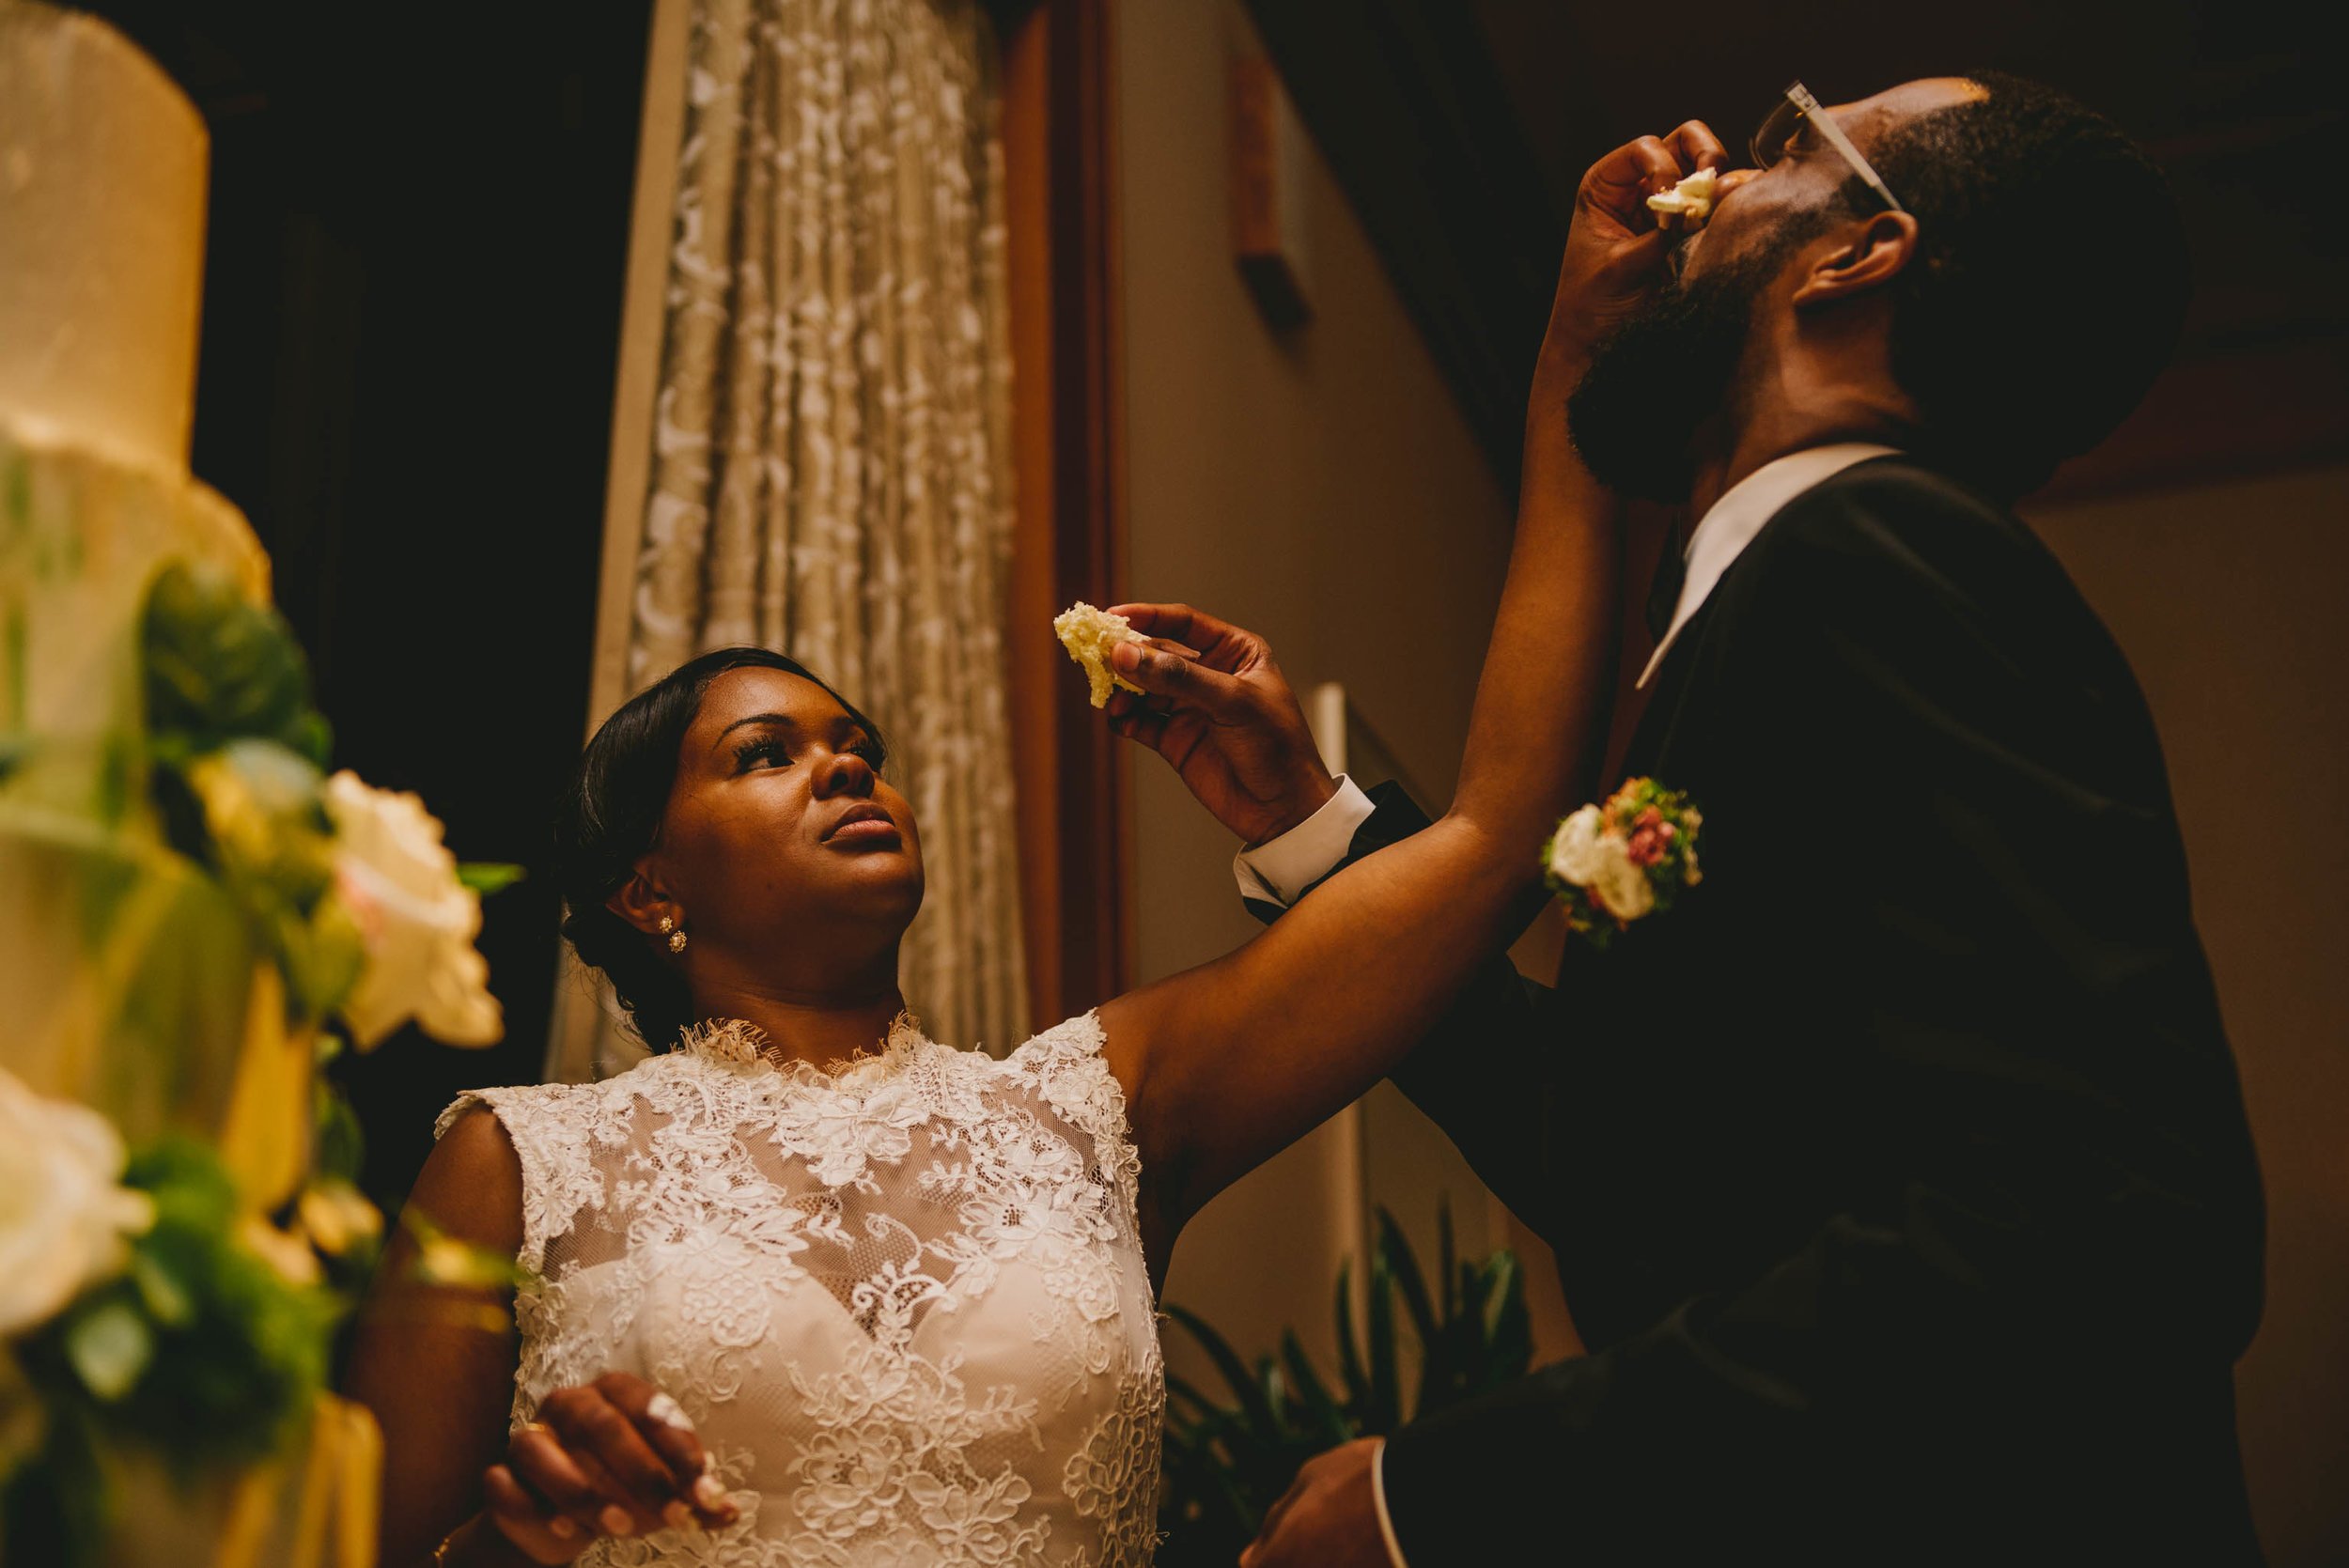 The bride smashes a piece of cake in the grooms face at the Raleigh, NC wedding